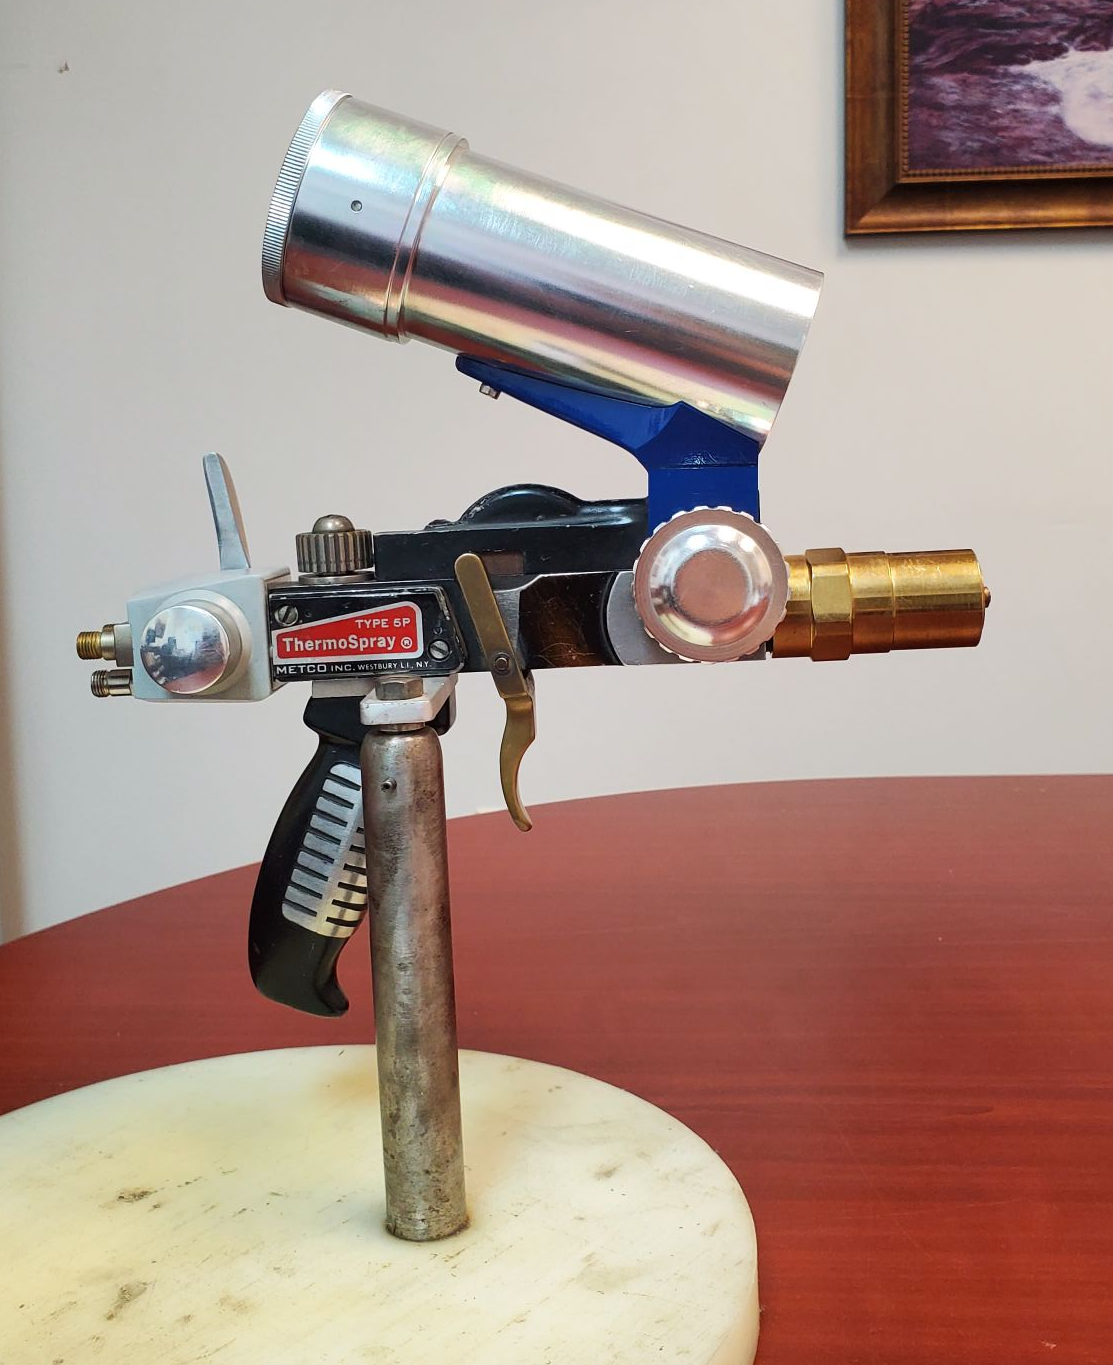 https://plasmapowders.com/media/reconditioned-metco-5p-torch-for-sale.png